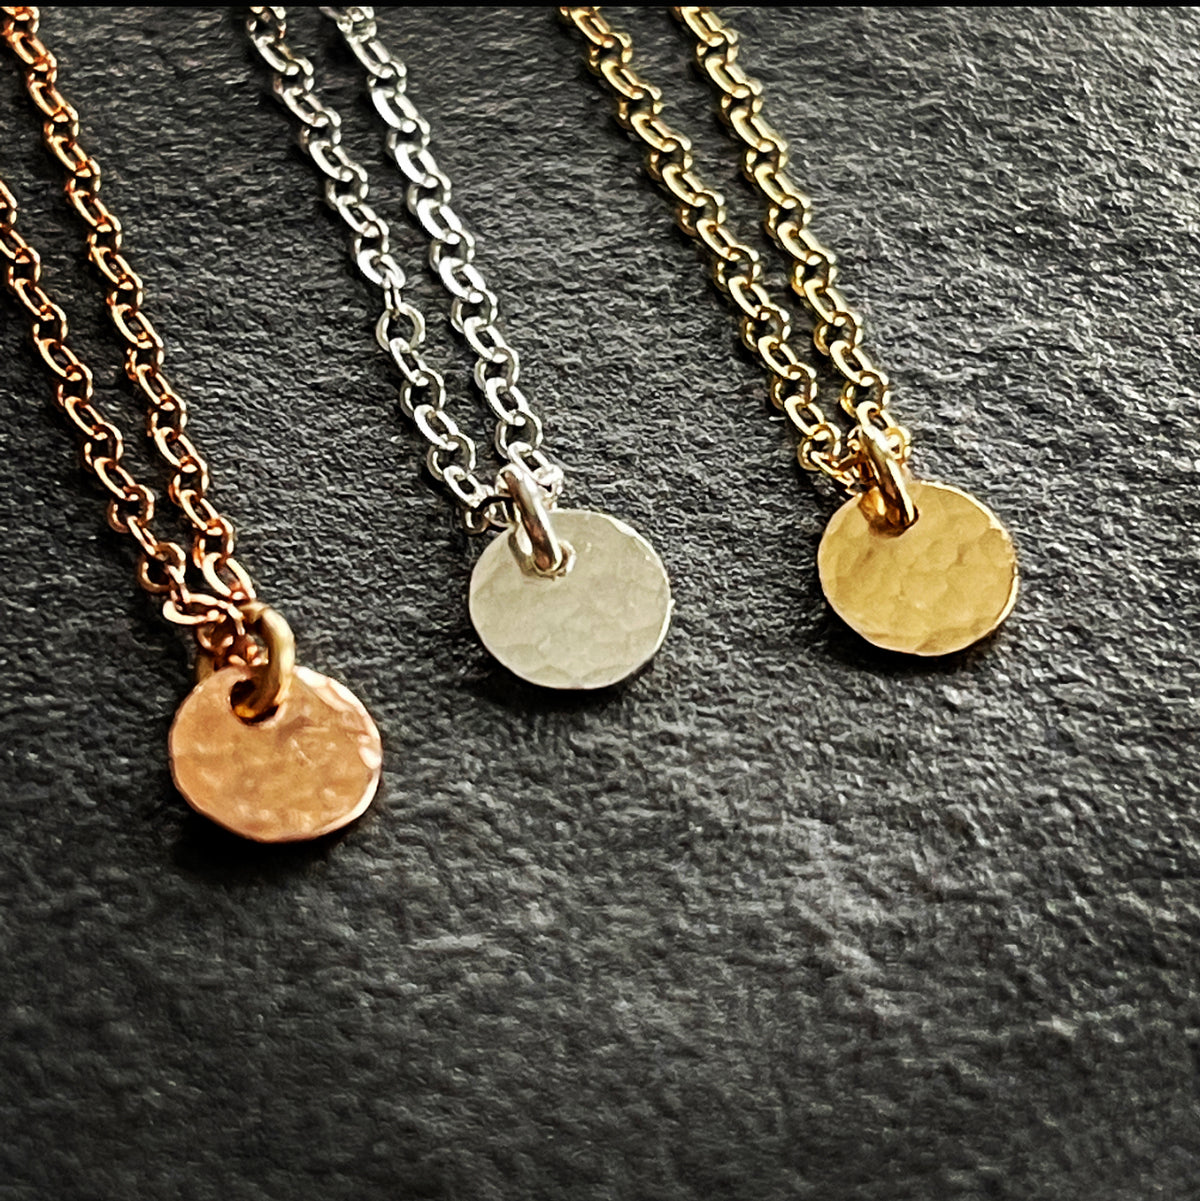 Delicate Disc Necklace